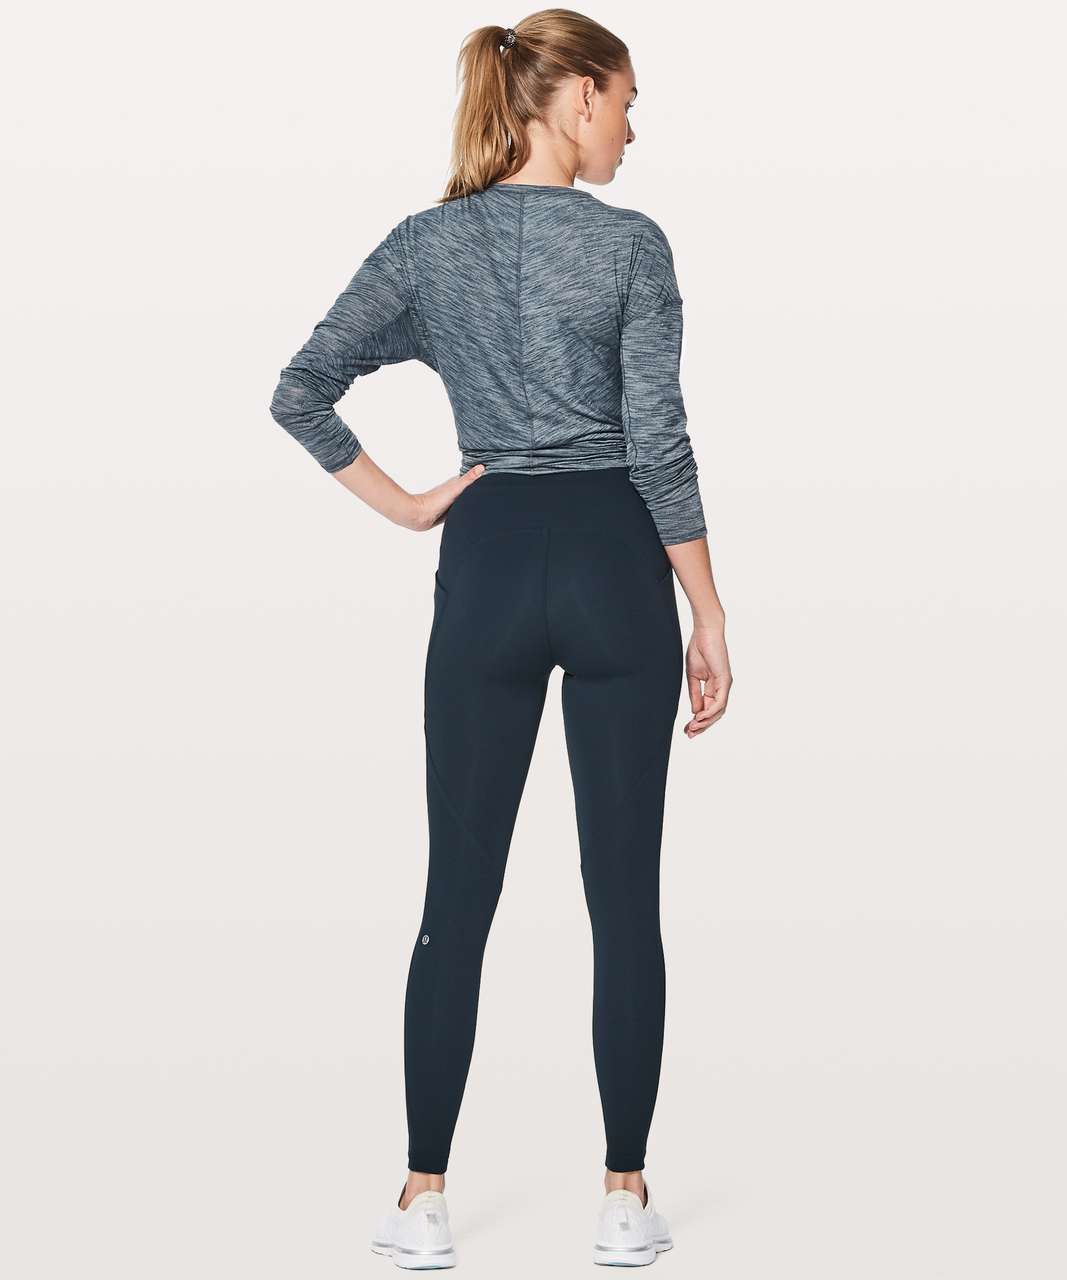 Lululemon Lead The Pack Tight 28" - Nocturnal Teal